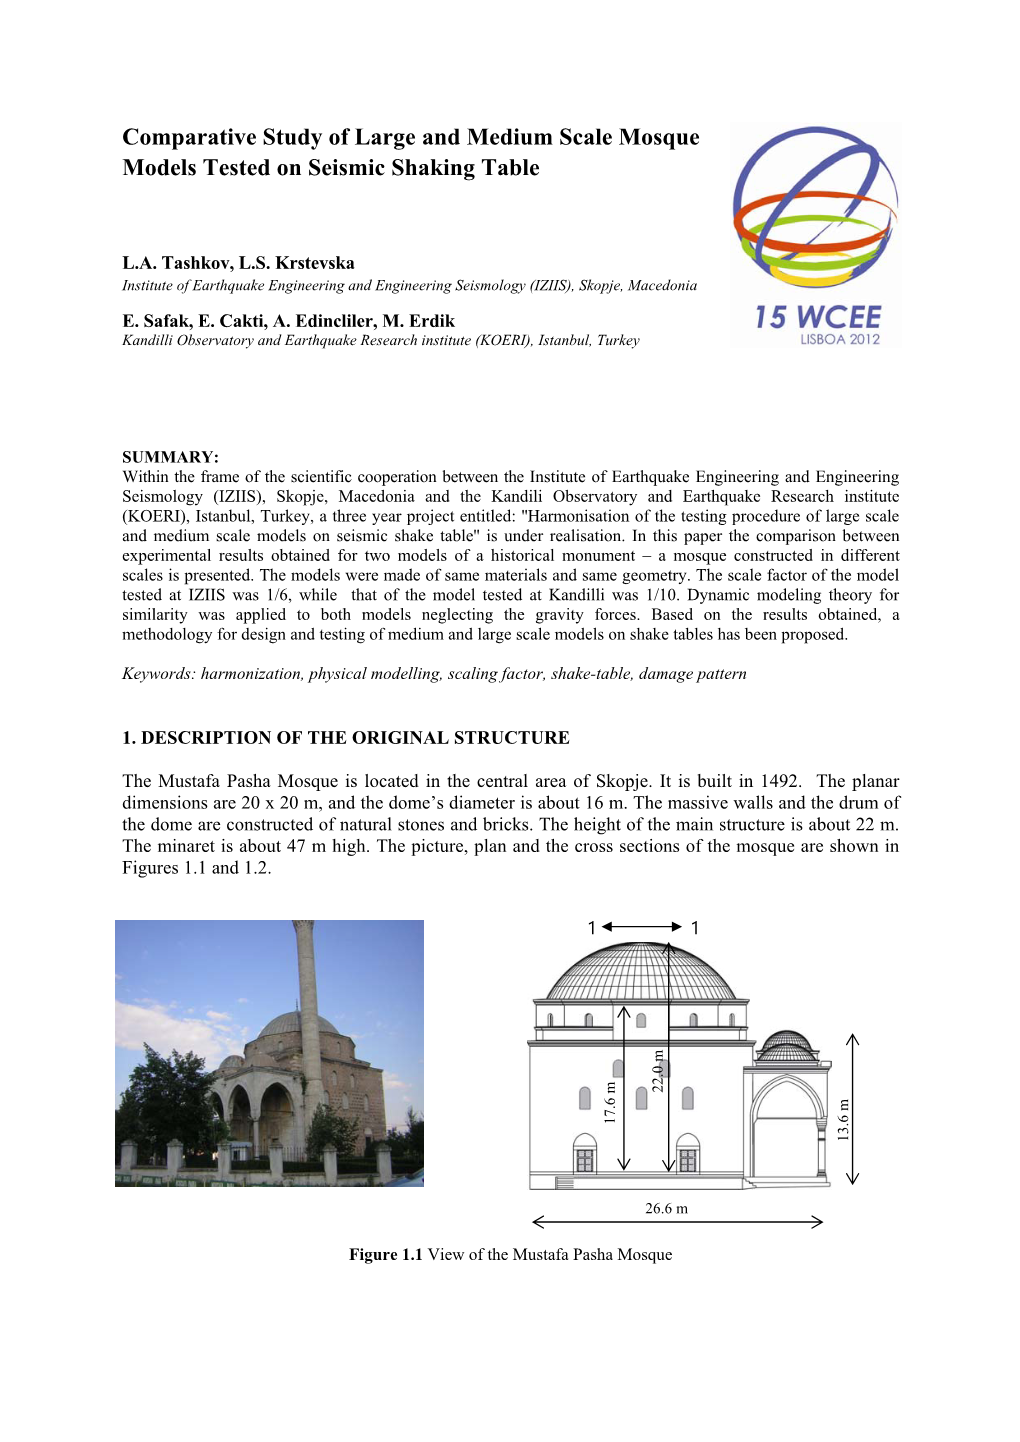 Comparative Study of Large and Medium Scale Mosque Models Tested on Seismic Shaking Table